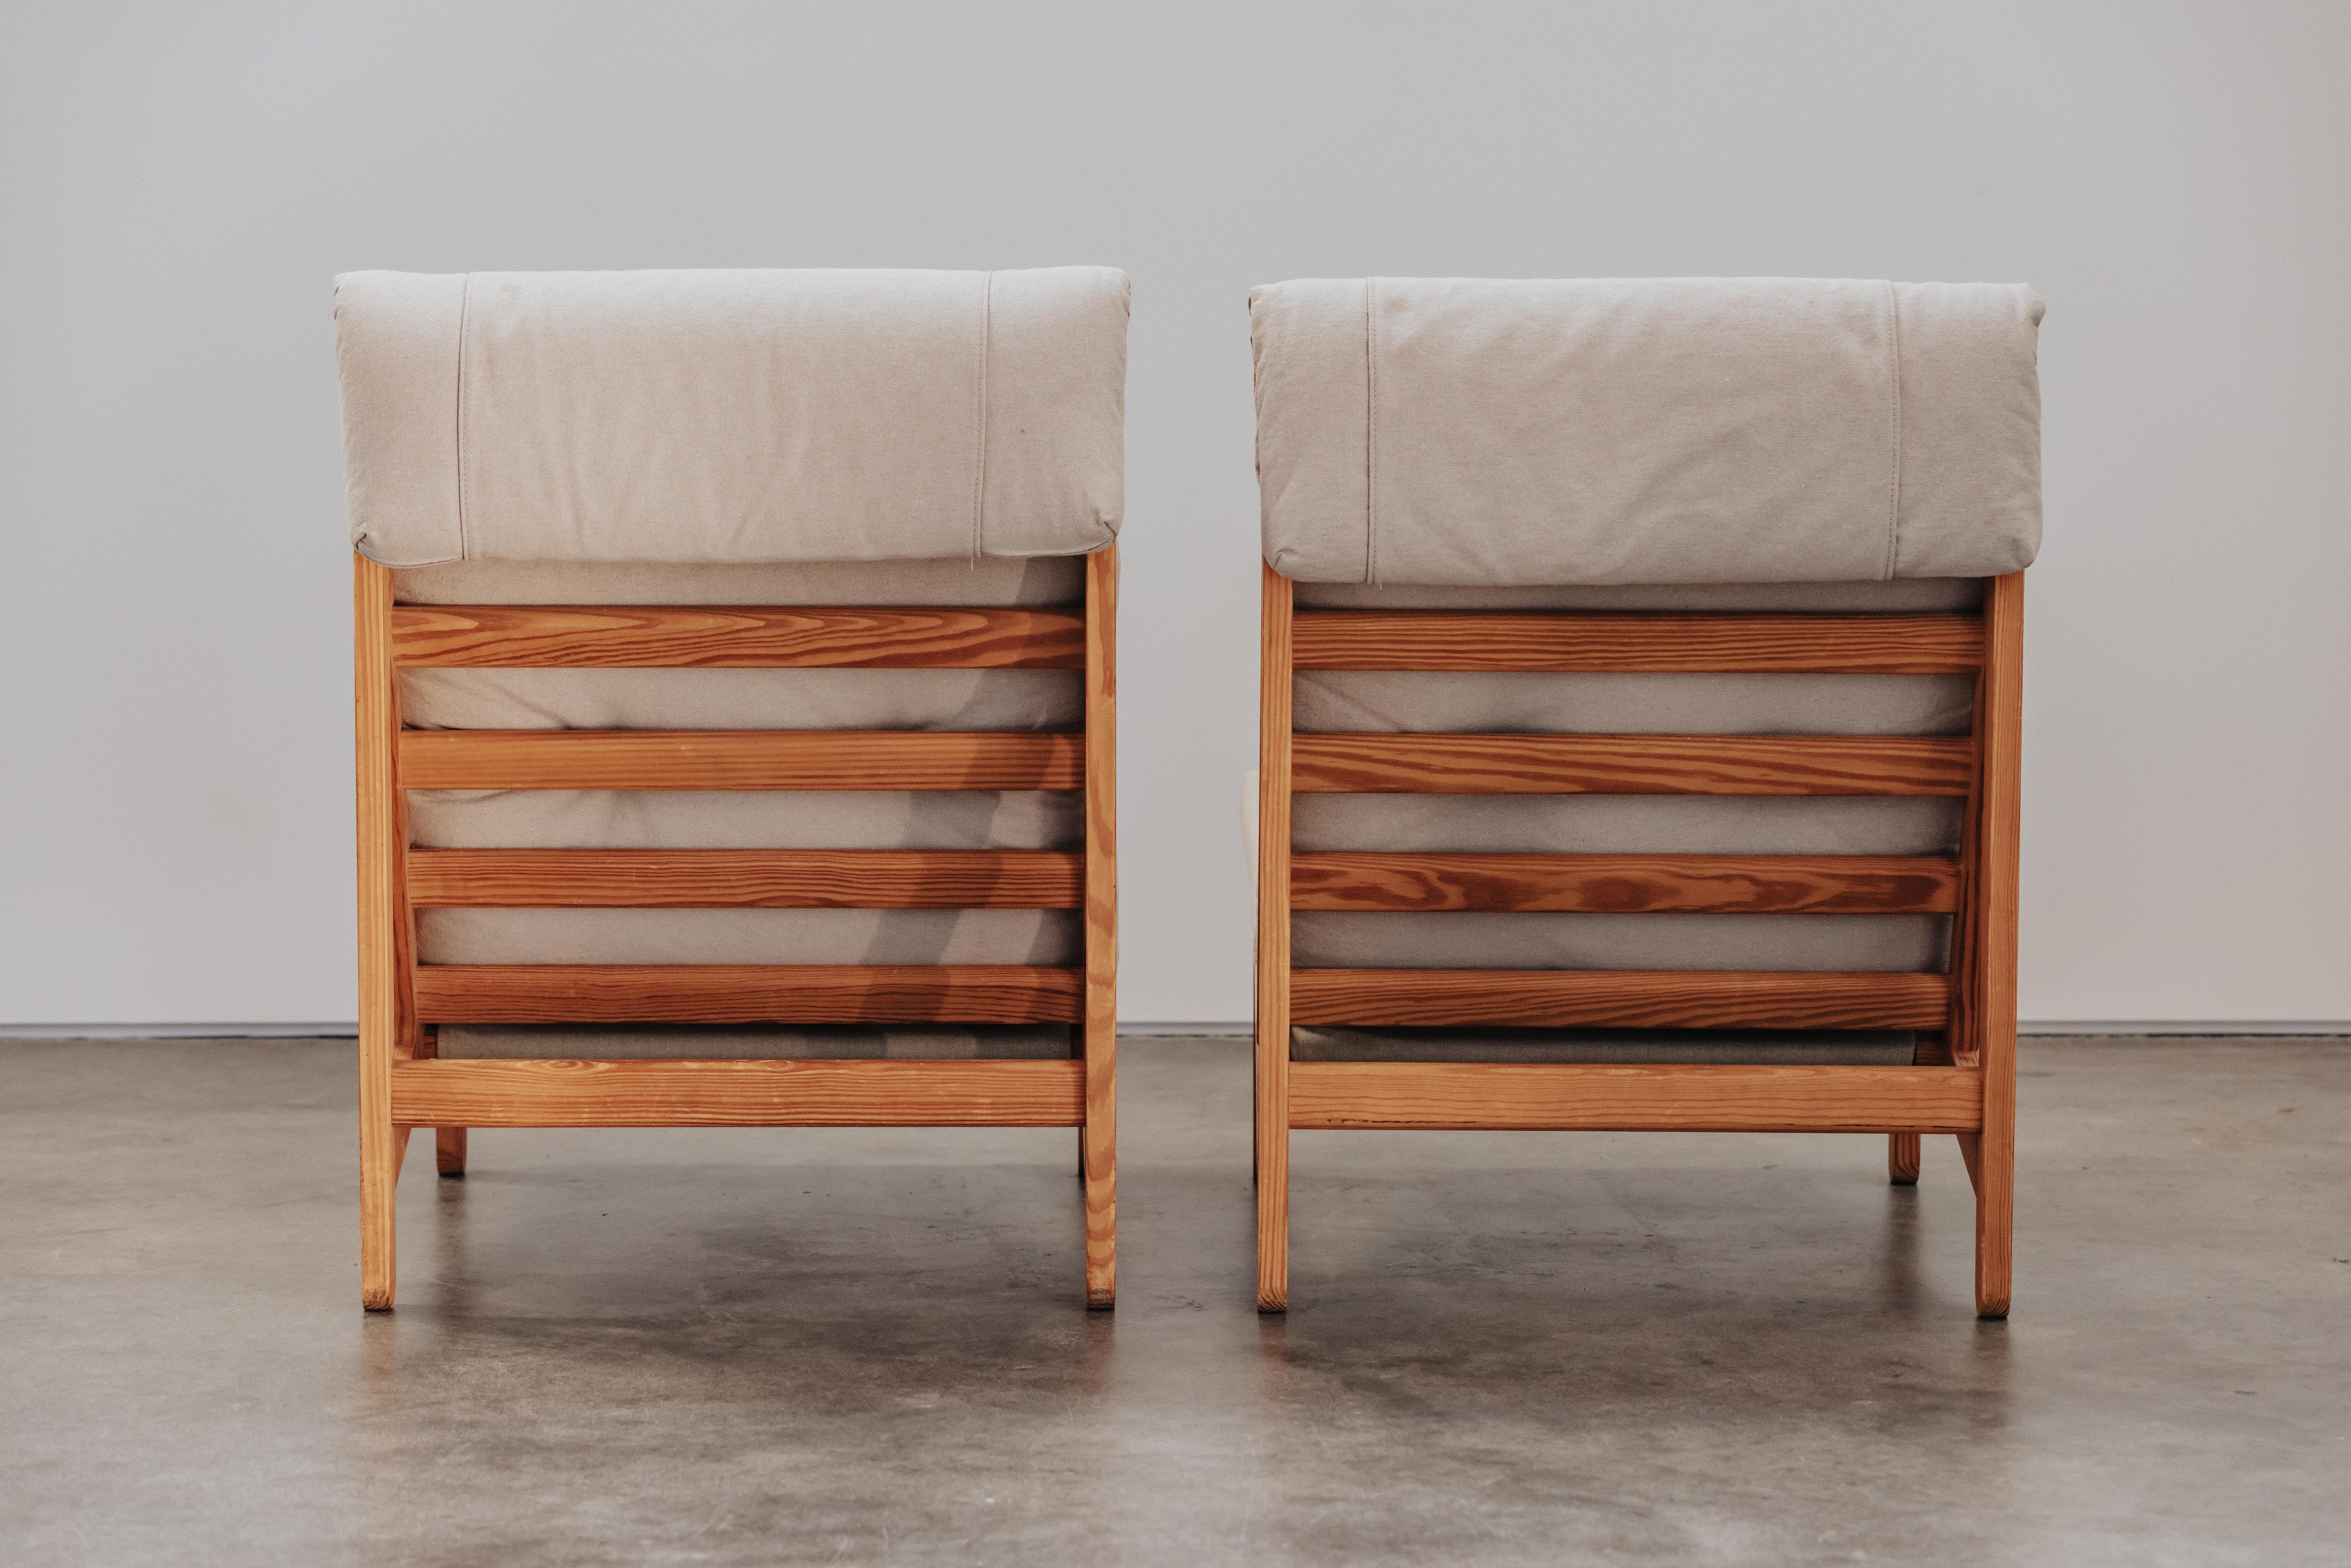 Vintage Pair Of Pine Lounge Chairs From Denmark, Circa 1970 In Good Condition For Sale In Nashville, TN